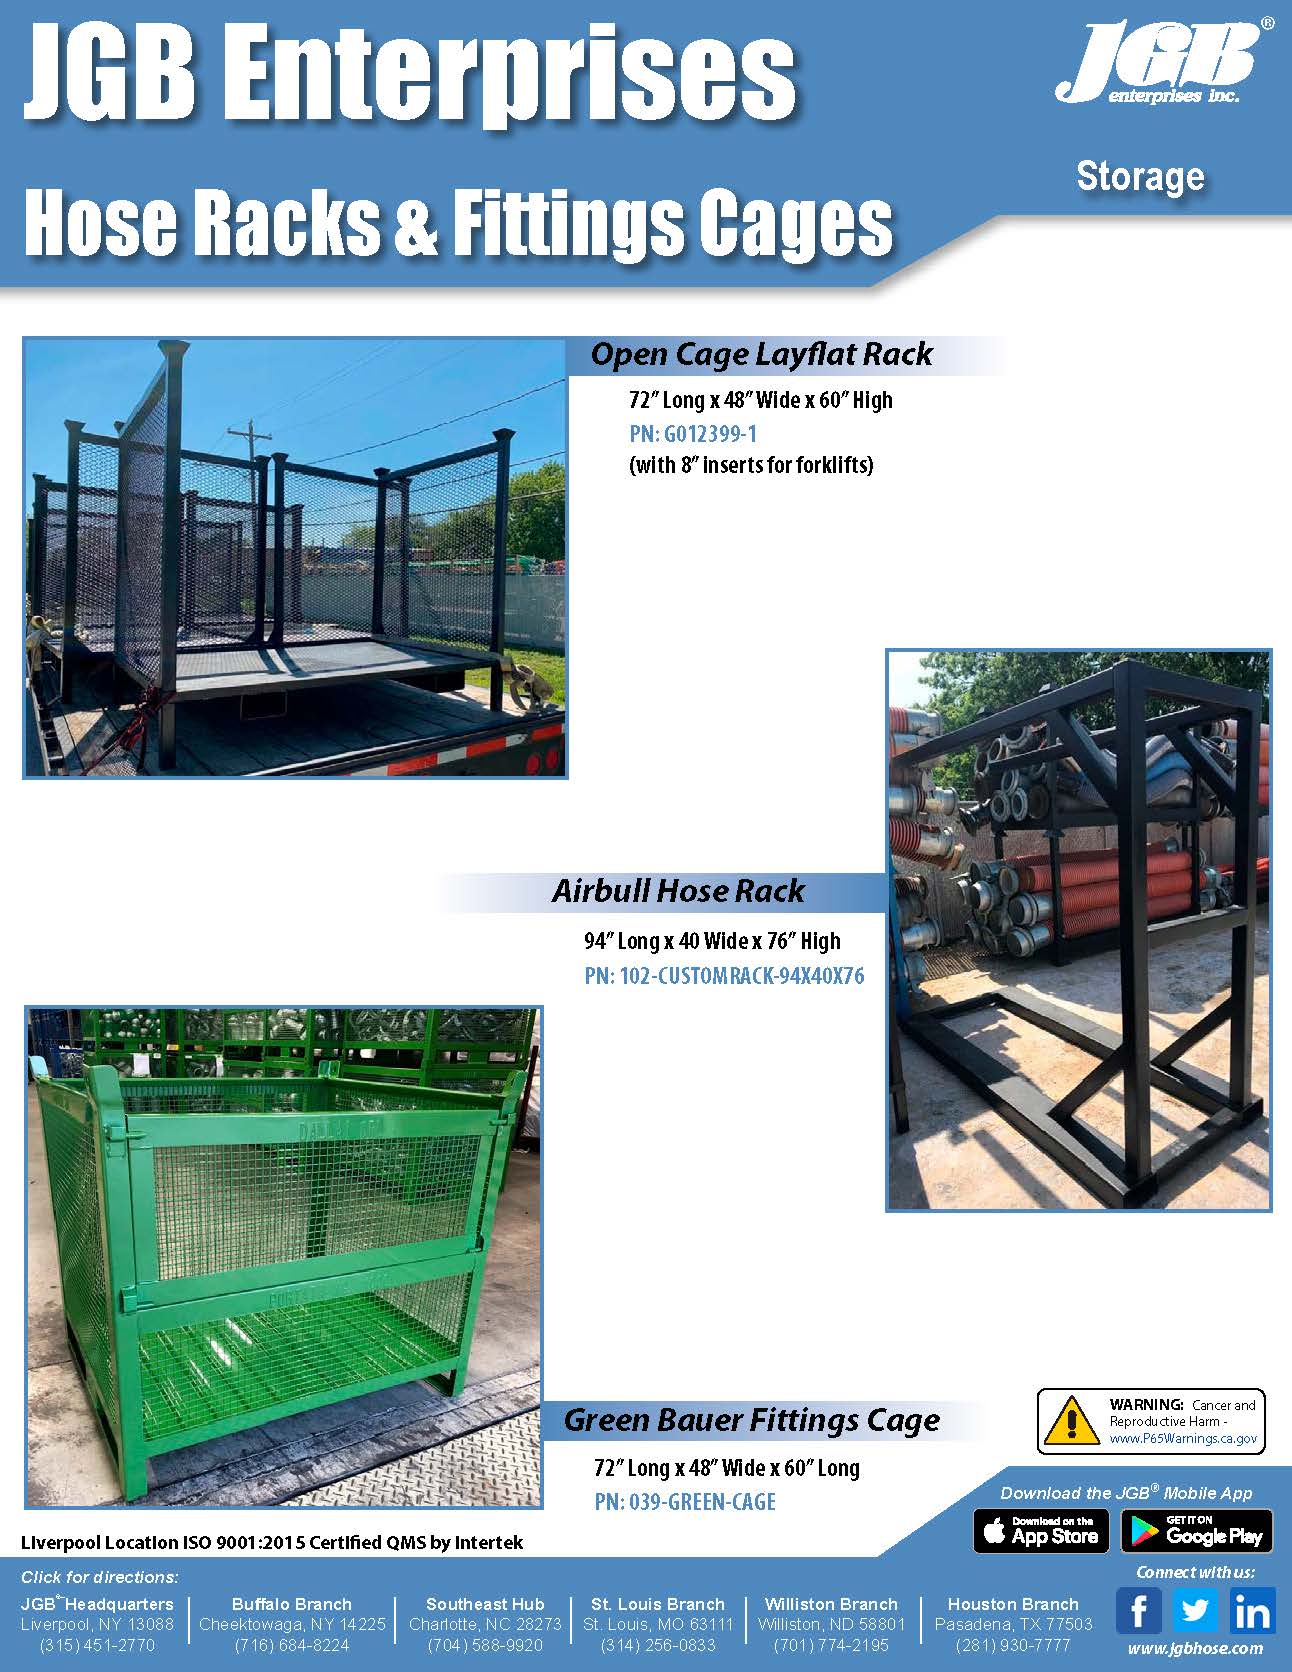 Hose Racks & Fittings Cages